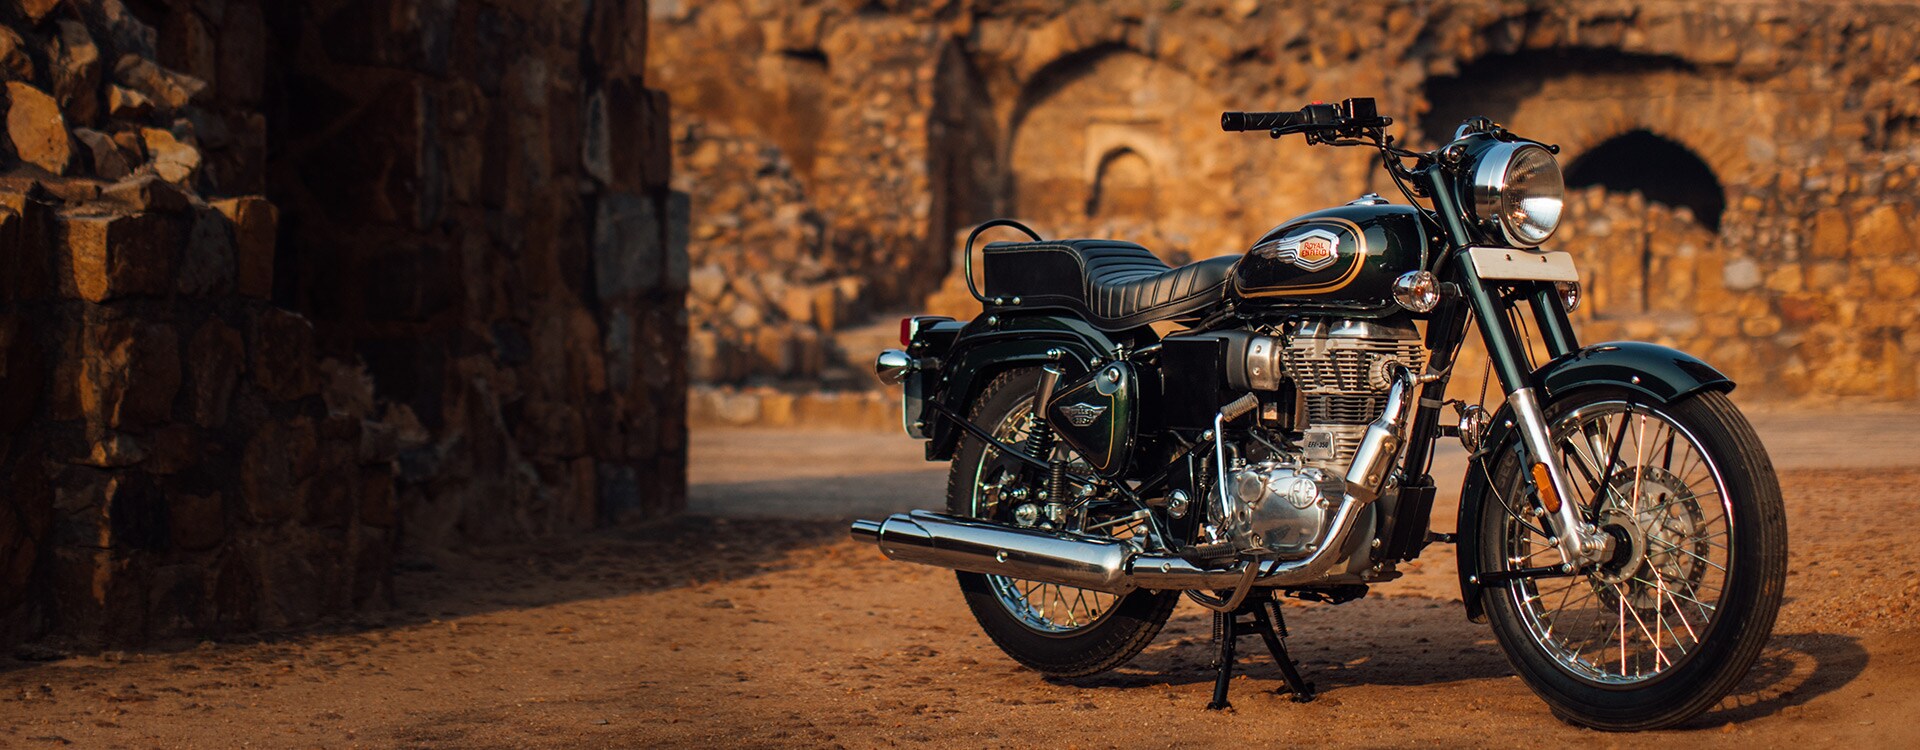 RE Bullet 350 Price, Colours, Images & Mileage in India | Royal ...